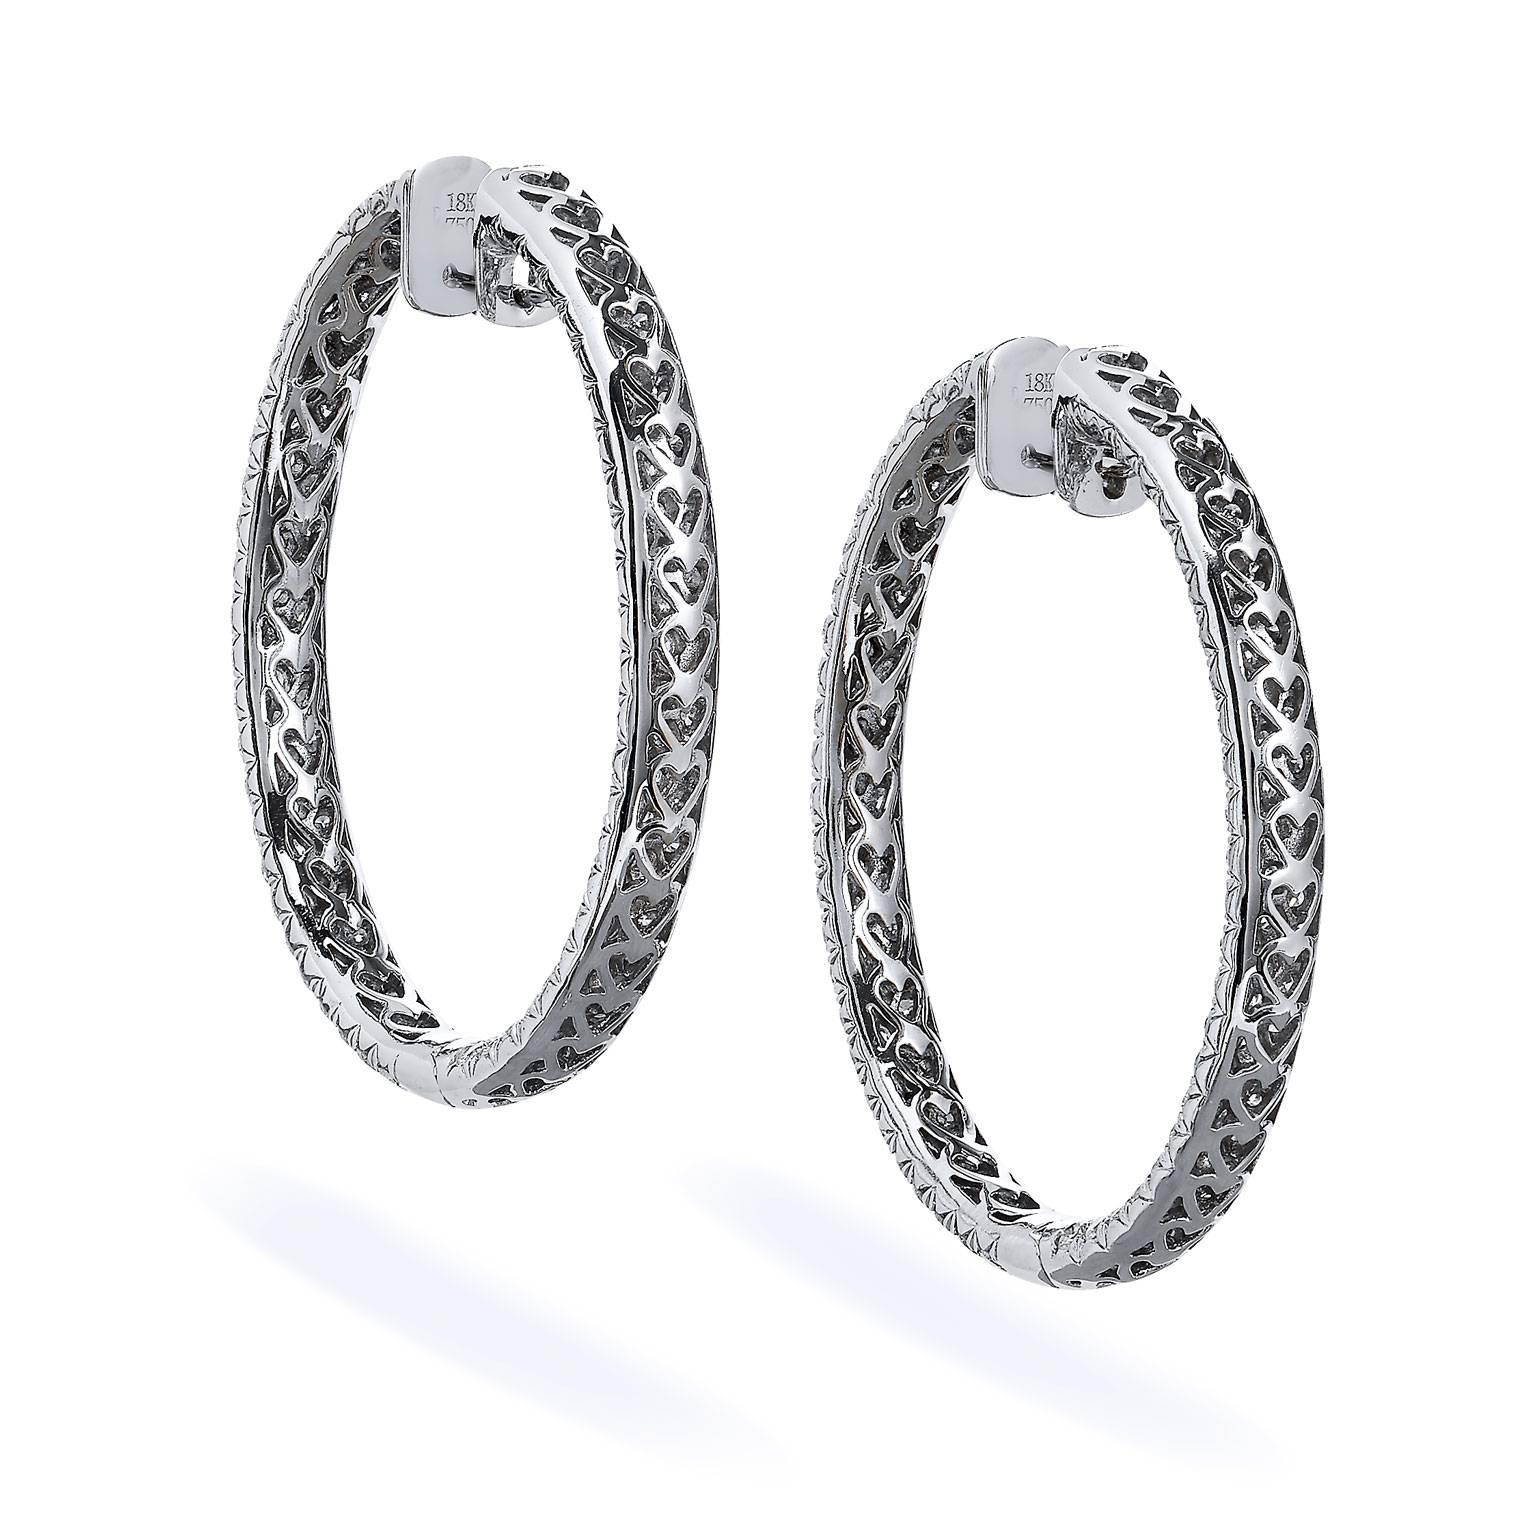 7.70 carat of diamonds pave set (G/H/VS2/SI1) and arranged inside and out in triple rows are affixed within 18 karat white gold in these striking hoop earrings. For added distinction and ornamentation, hearts are embossed on the back side of each